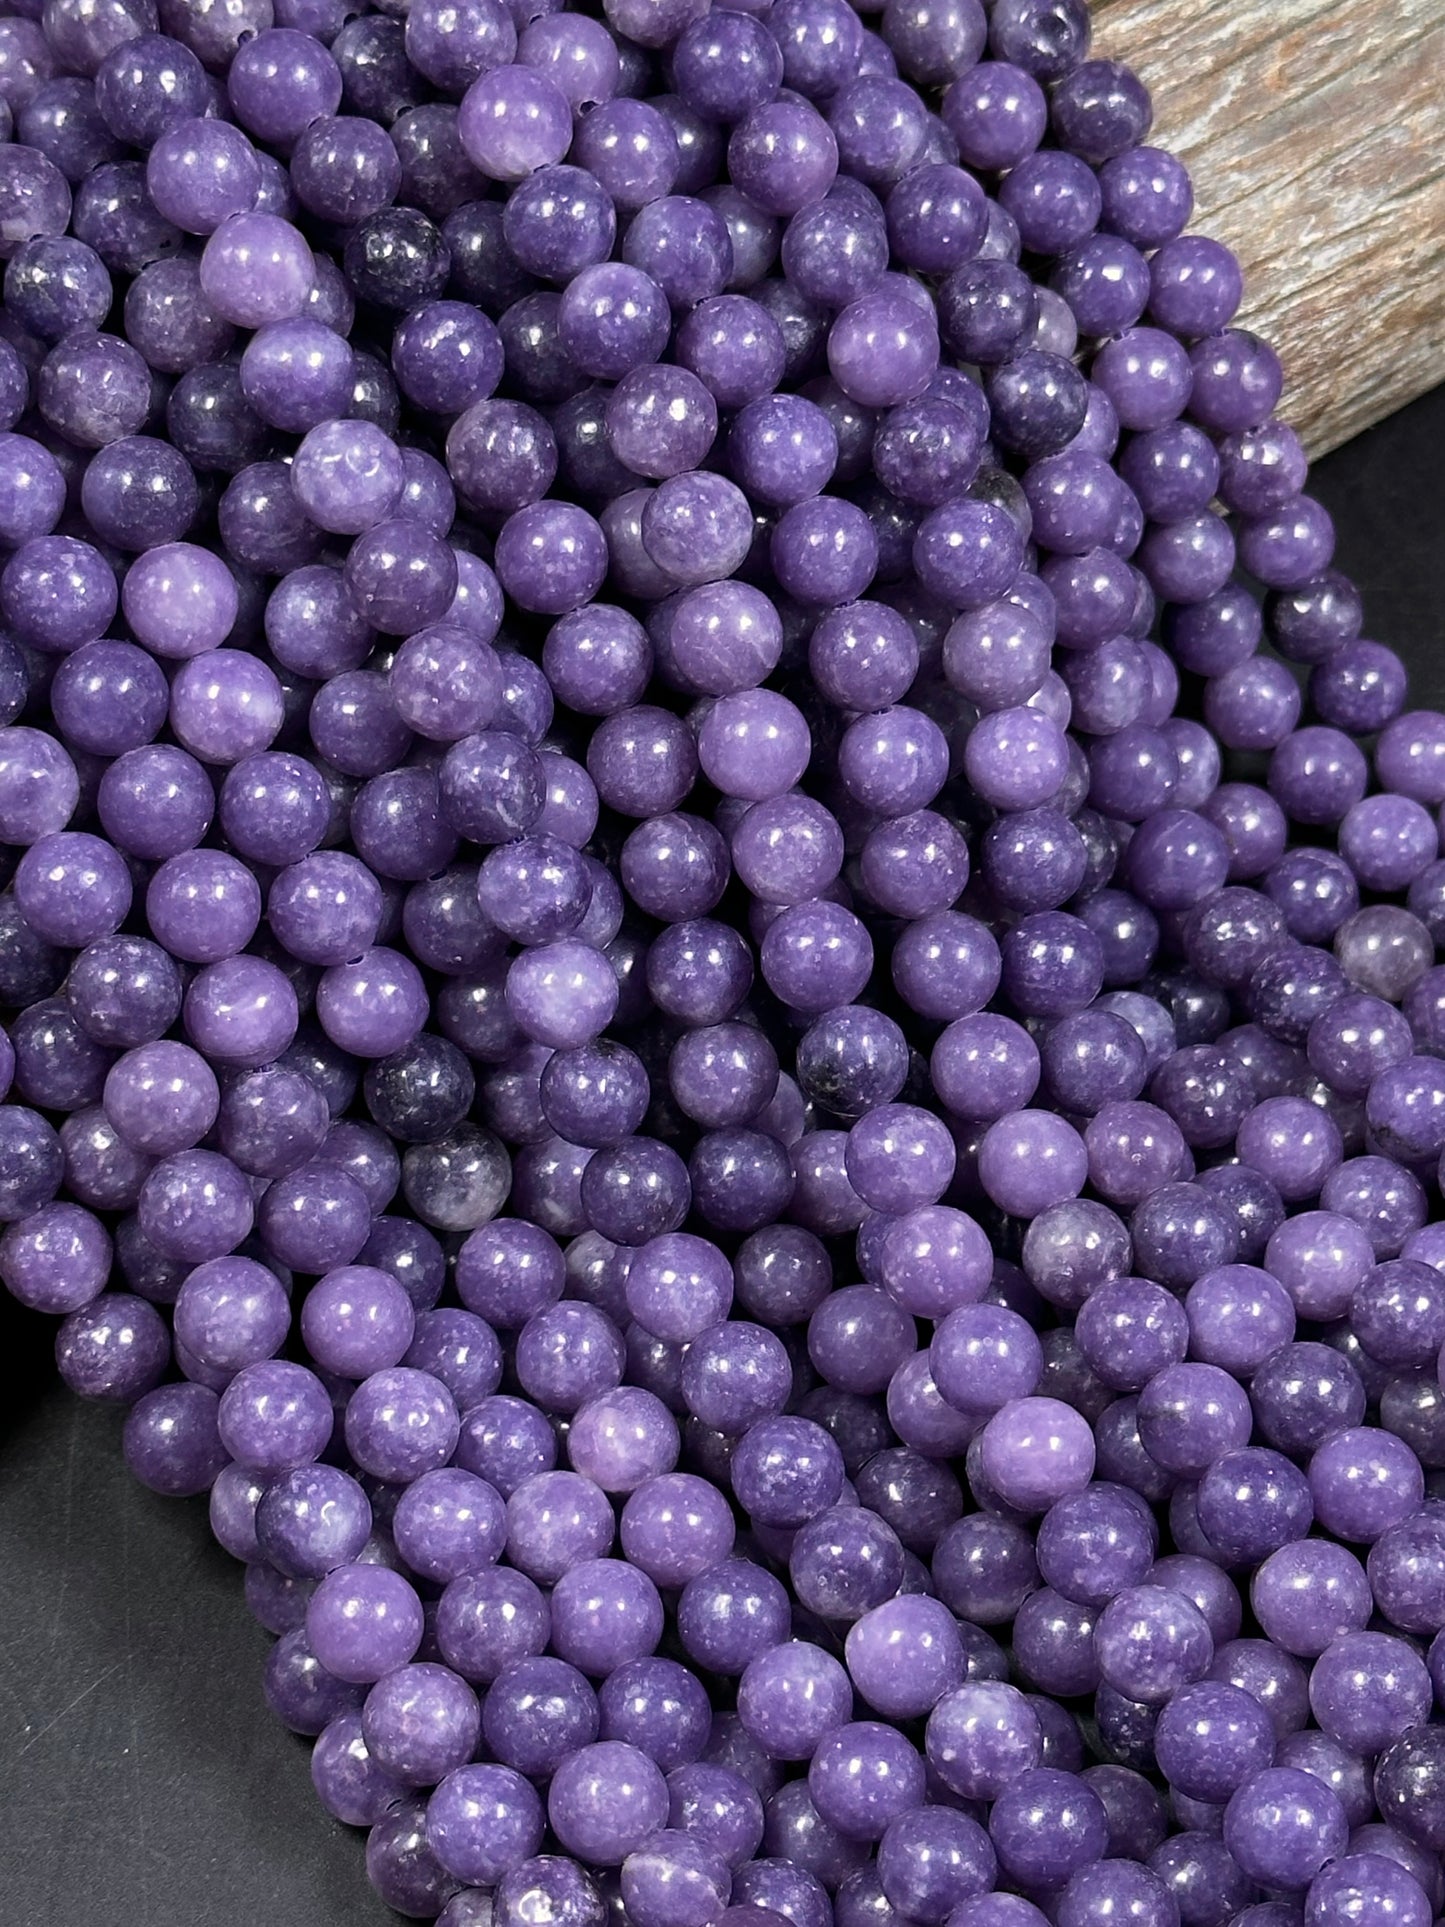 NATURAL Lepidolite Gemstone Bead 6mm 8mm 10mm Round Bead, Beautiful Natural Purple Color Lepidolite Gemstone Bead, Great Quality 15.5"